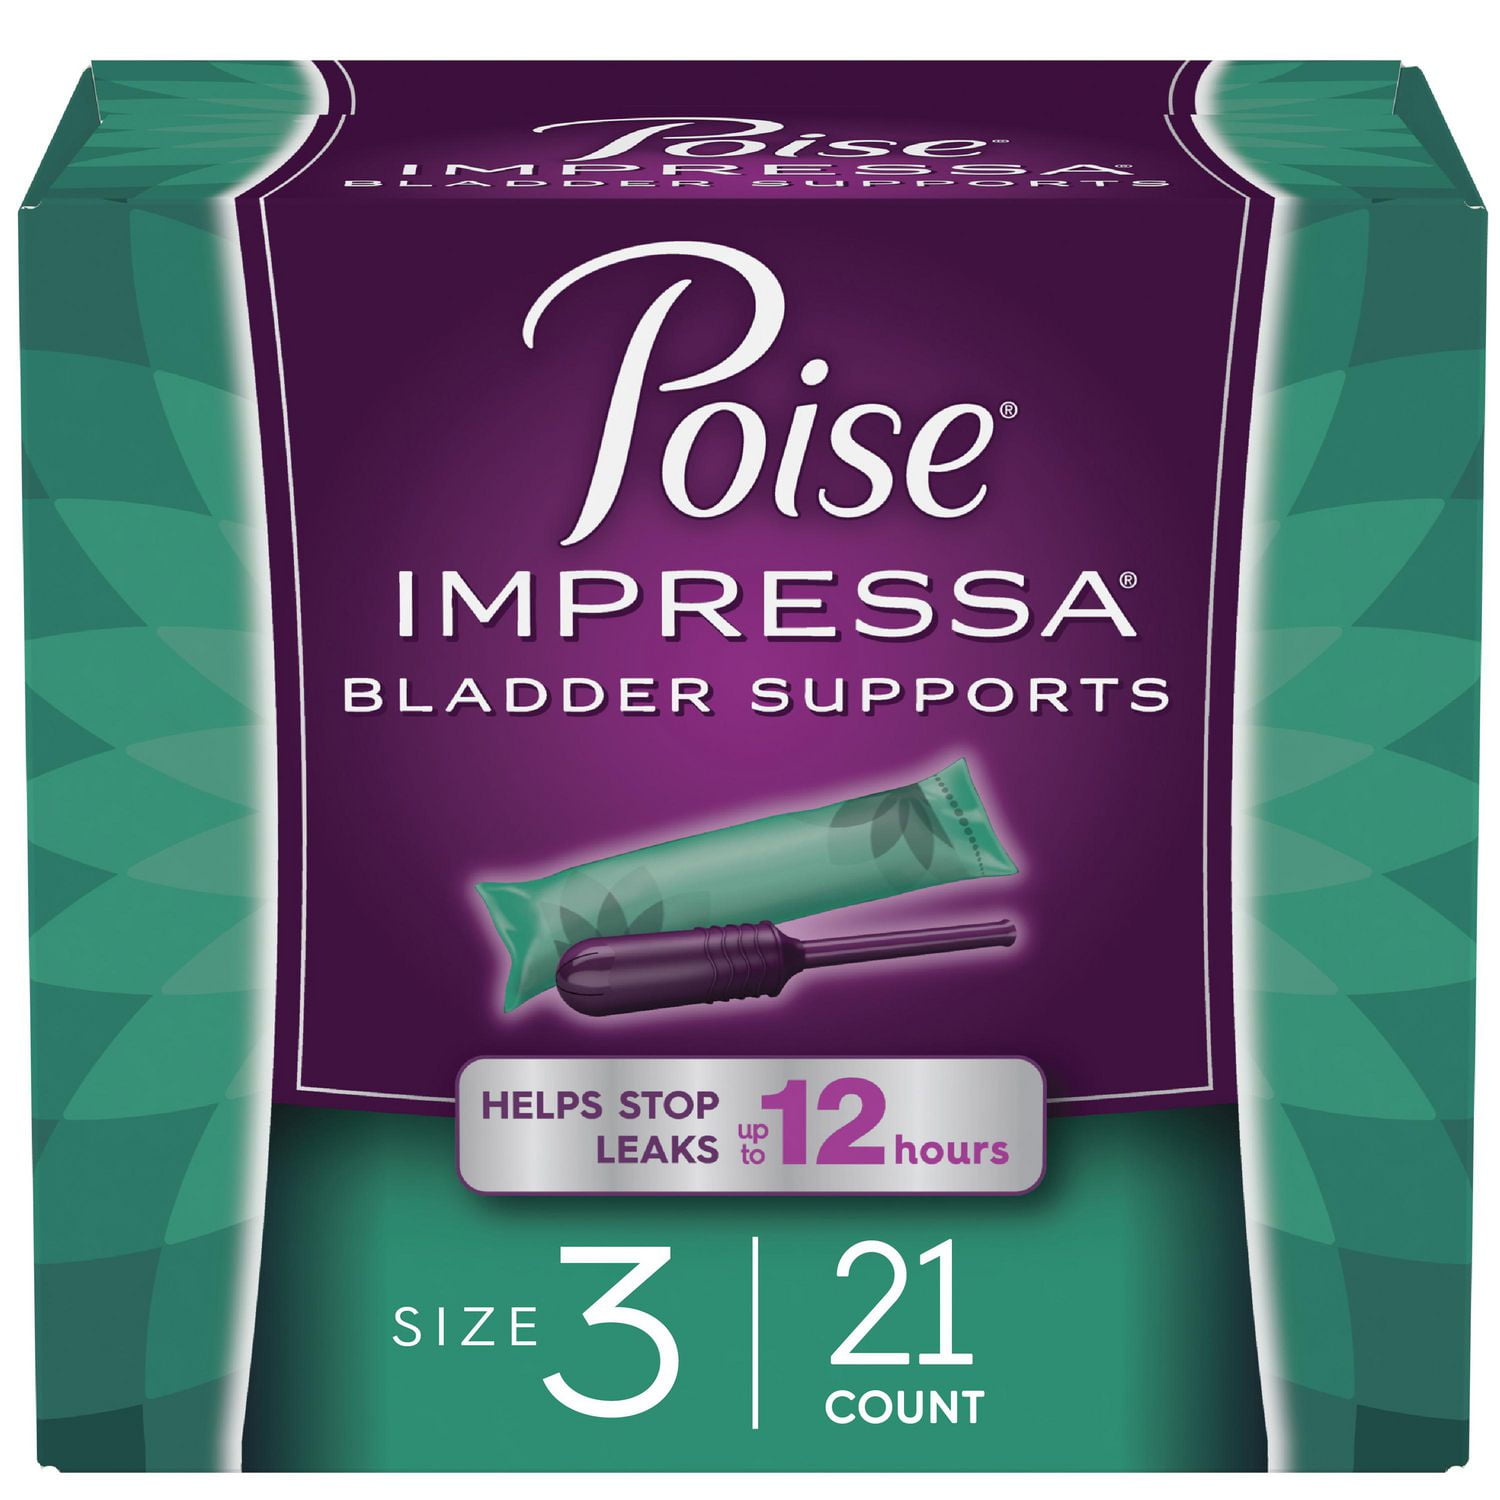 Stop Leaks Before They Start w/ Poise Impressa at CVS